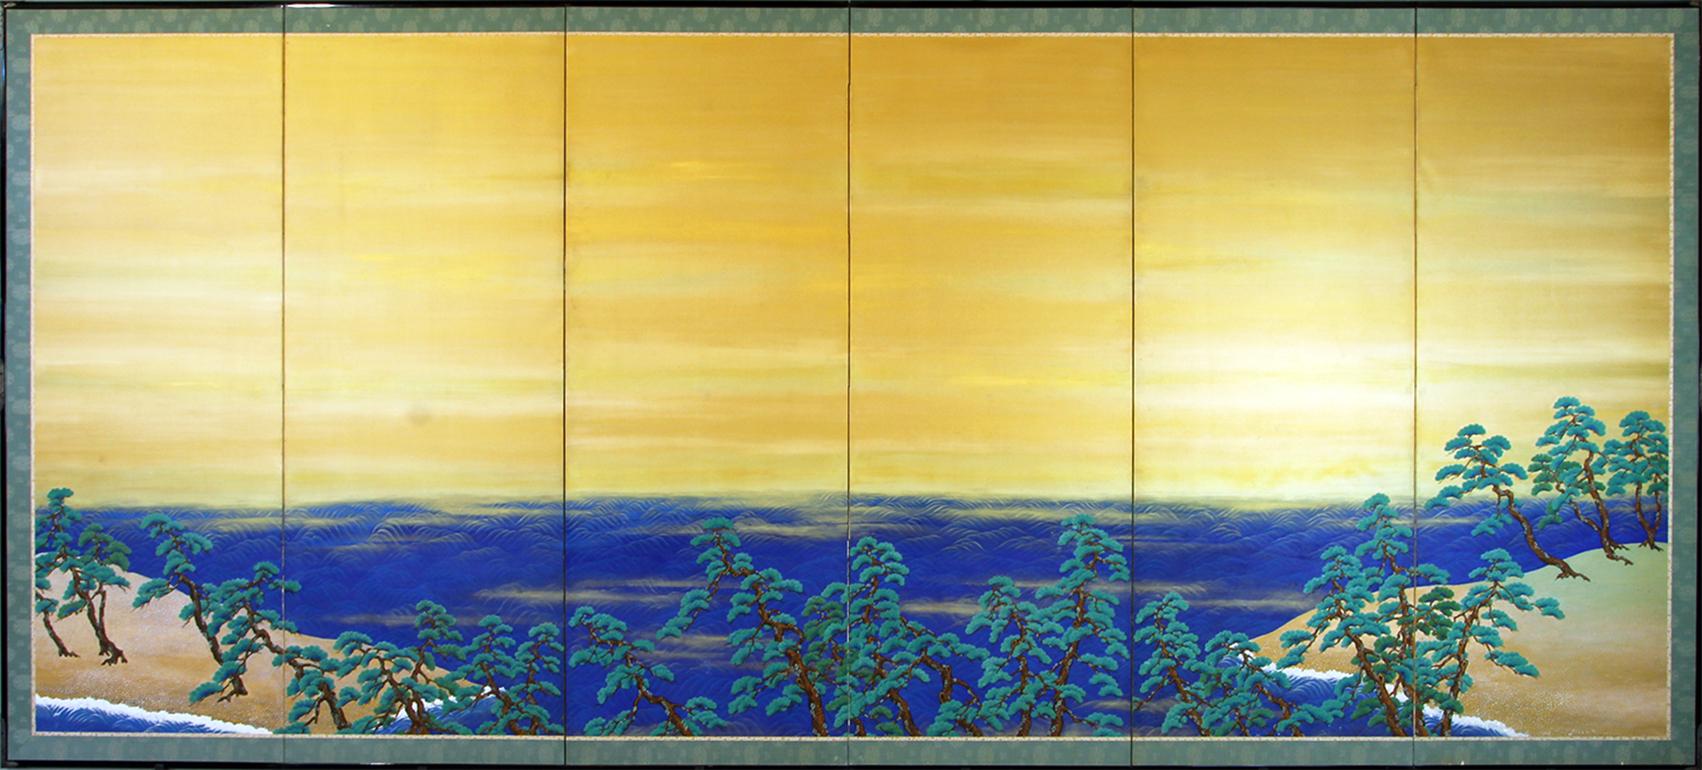 Six-panel Japanese screen painted with pigments on rice paper.
Pleasant summer landscape by the sea with pine trees and foaming waves on the beach.